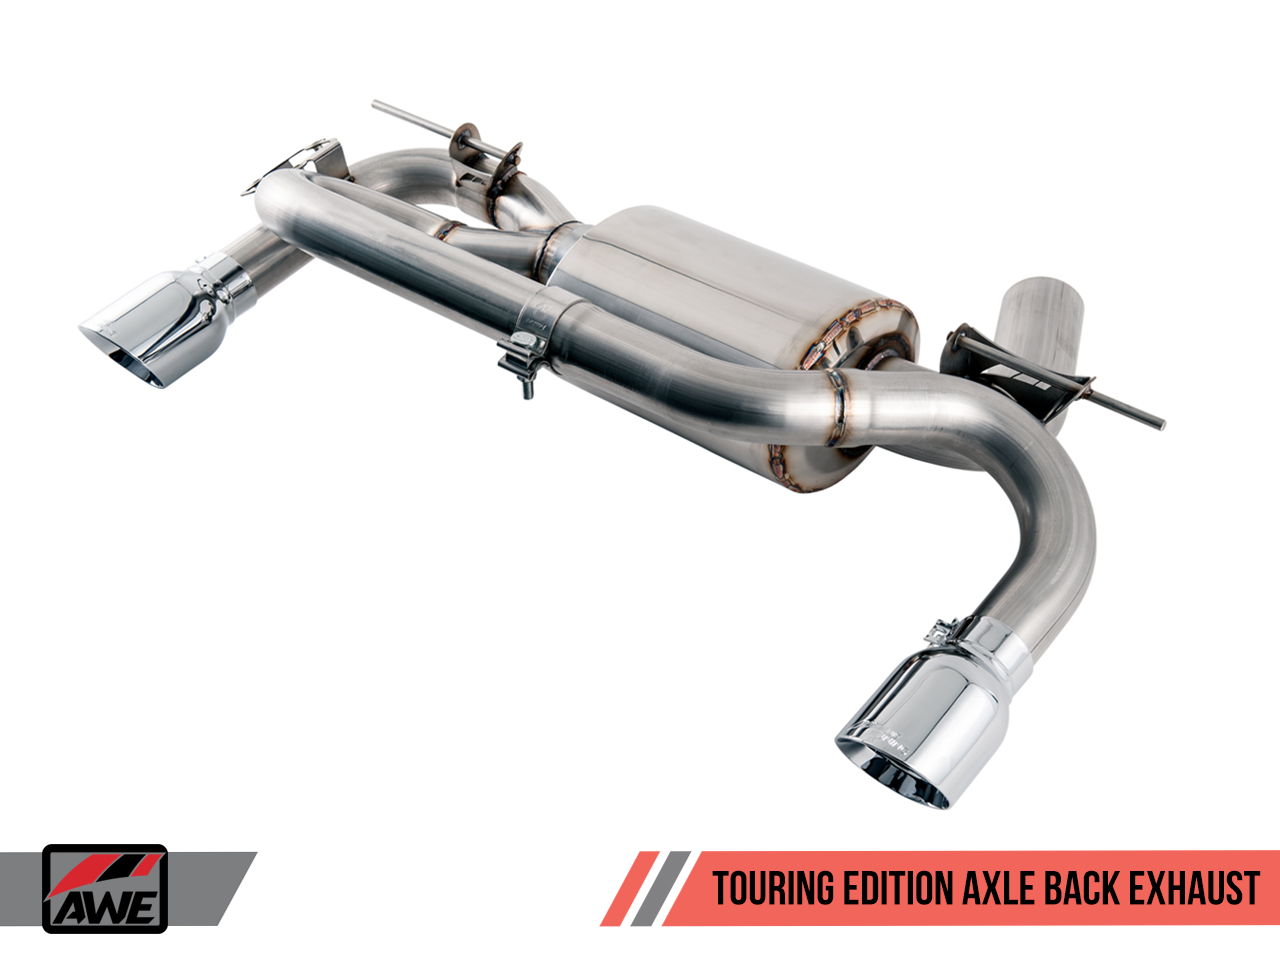 AWE Touring Edition Axle Back Exhaust for BMW F3X 335i/435i - Chrome Silver Tips (90mm)